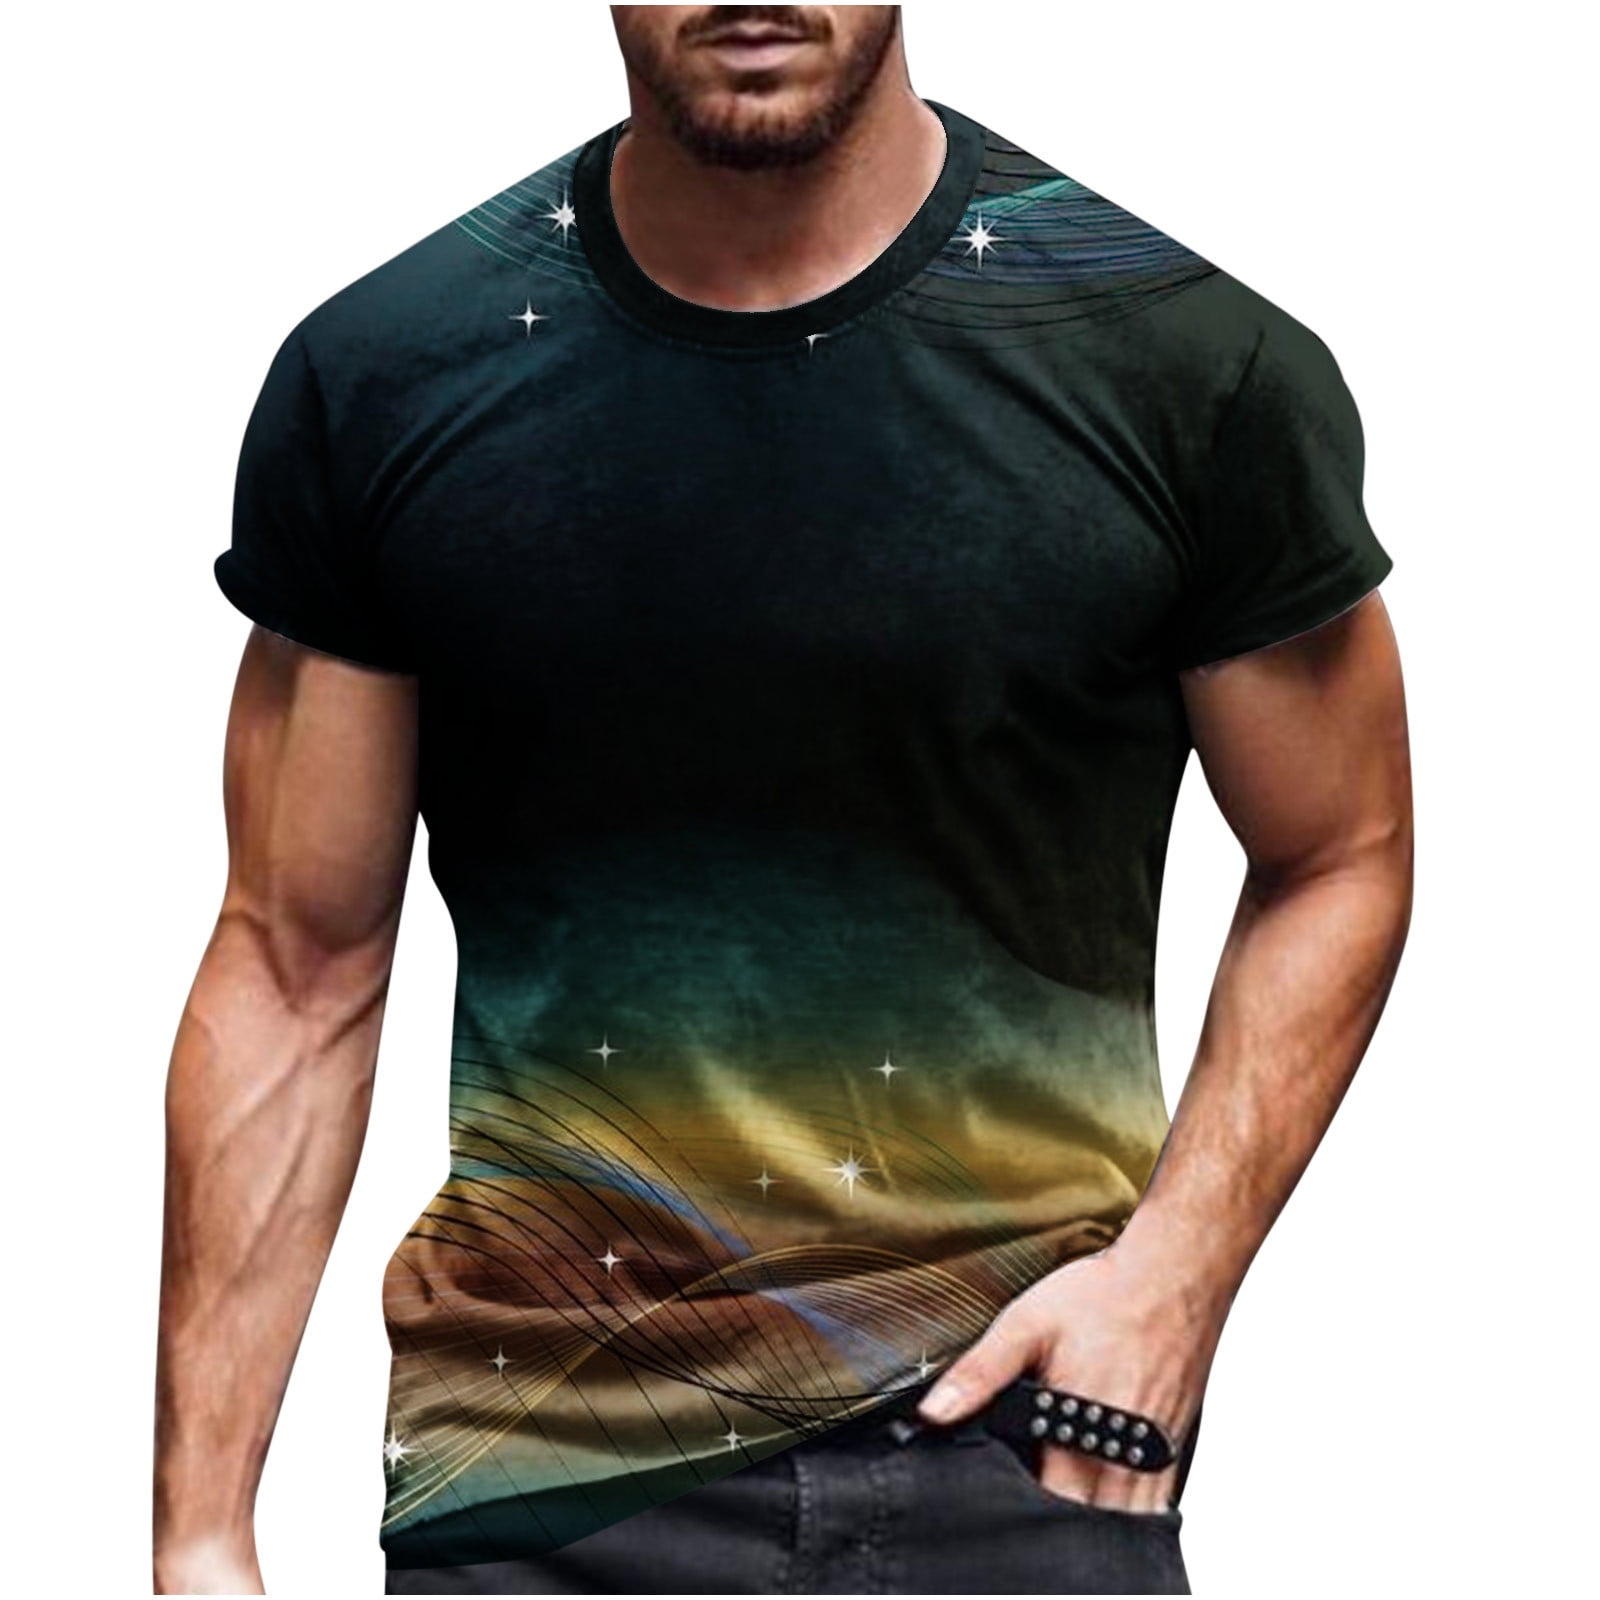 Ernkv Men's Slim Fit Comfy Tops Clearance Short Sleeve Shirts Casual Sports Clothing 3D Digital Printing Tees Round Neck Holiday Fashion Army Green XXL - Walmart.com